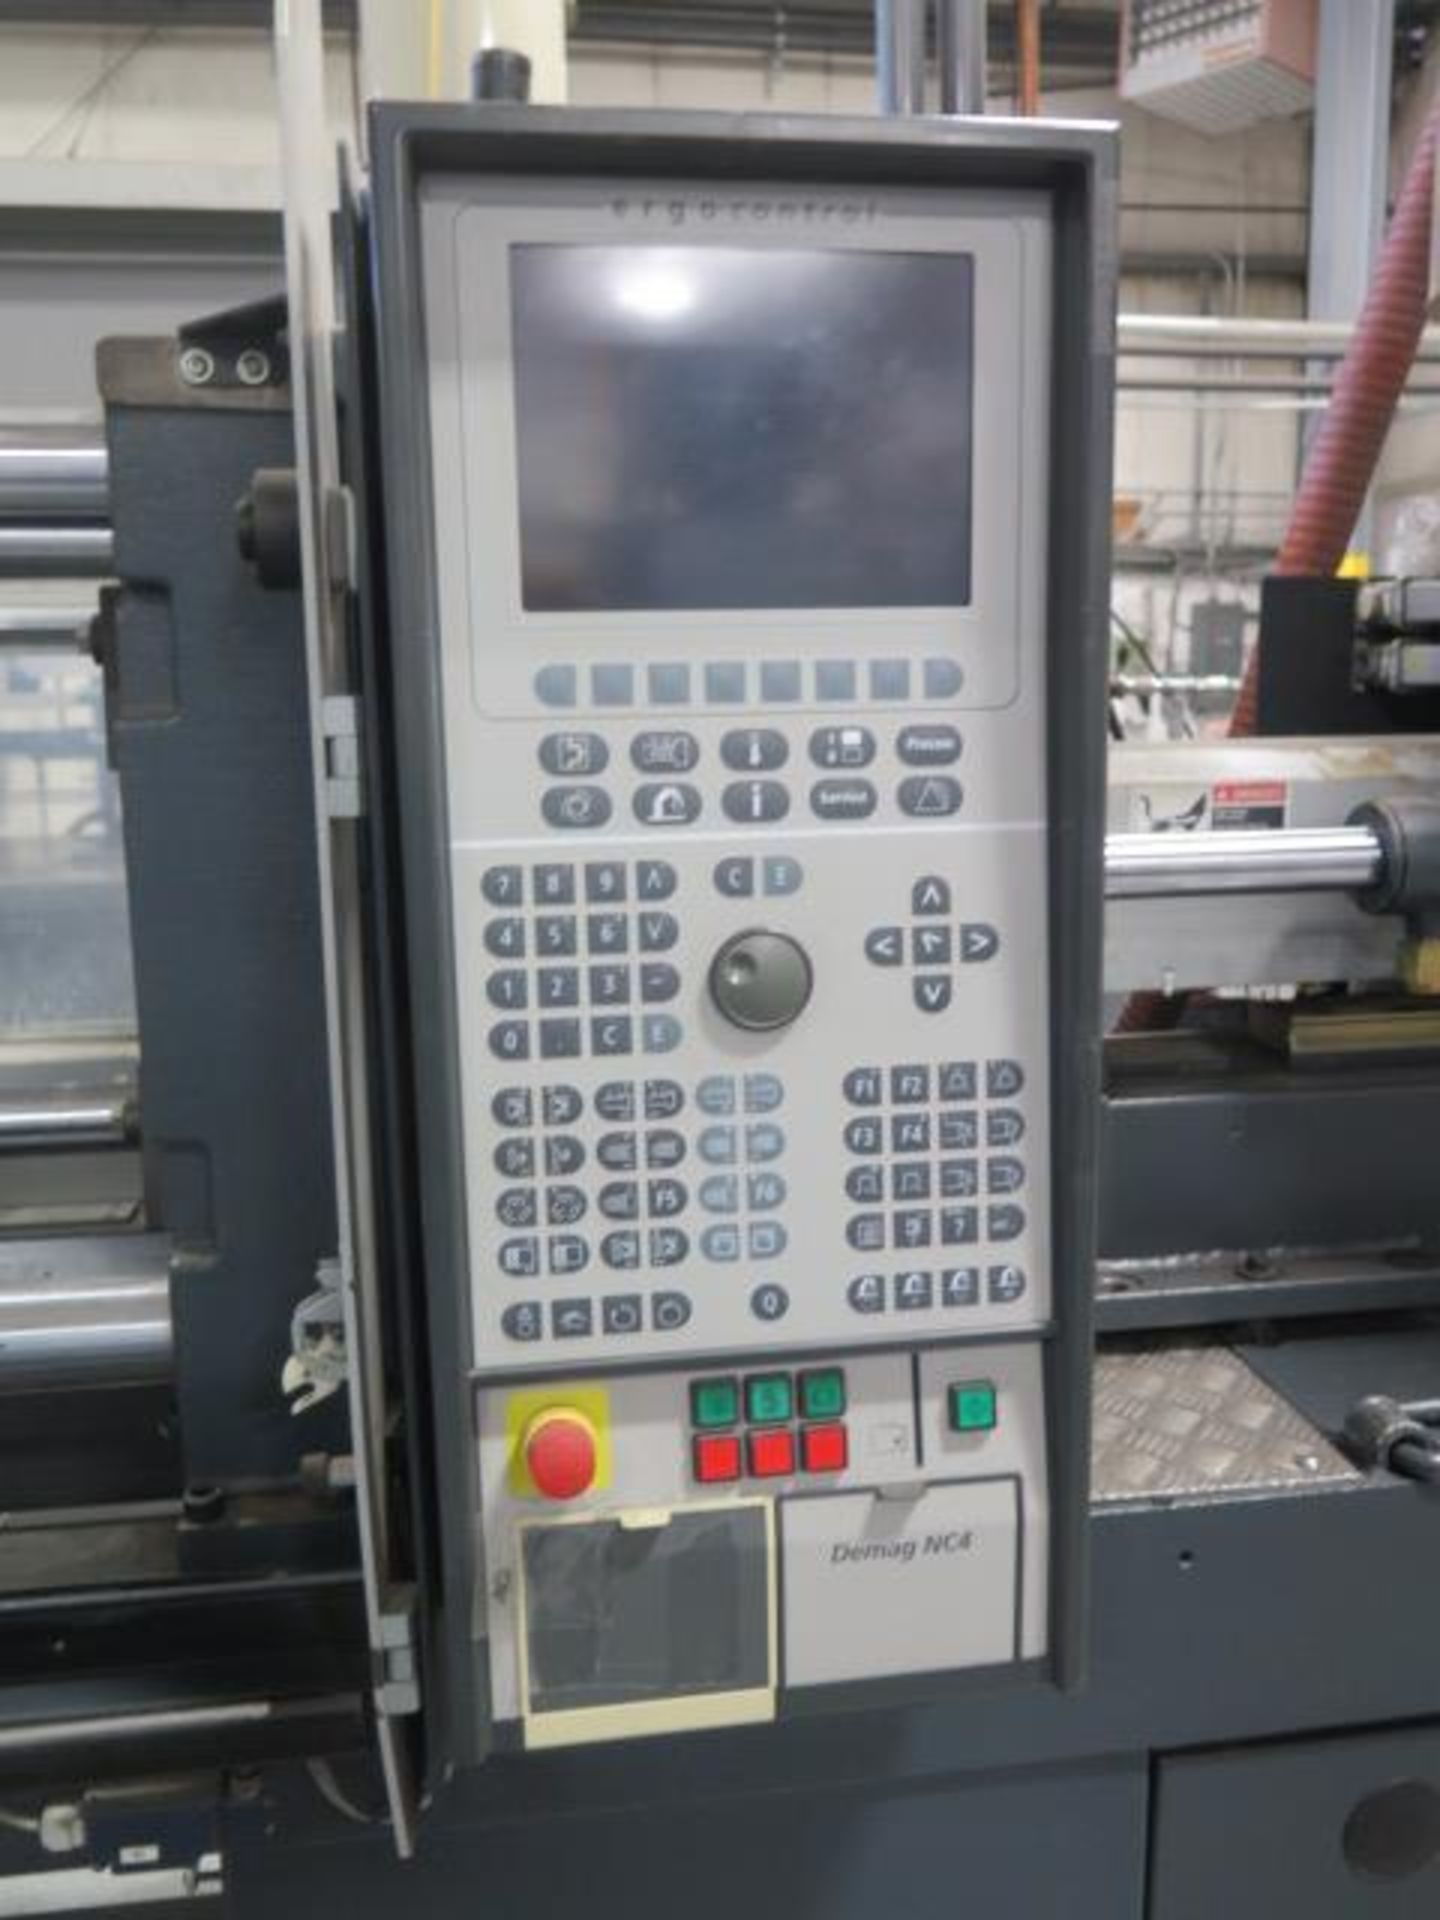 2000 Demag Ergotech Concept 1100/470-430 110-Ton Plastic Injection Molding s/n 7173-0068, SOLD AS IS - Image 10 of 16